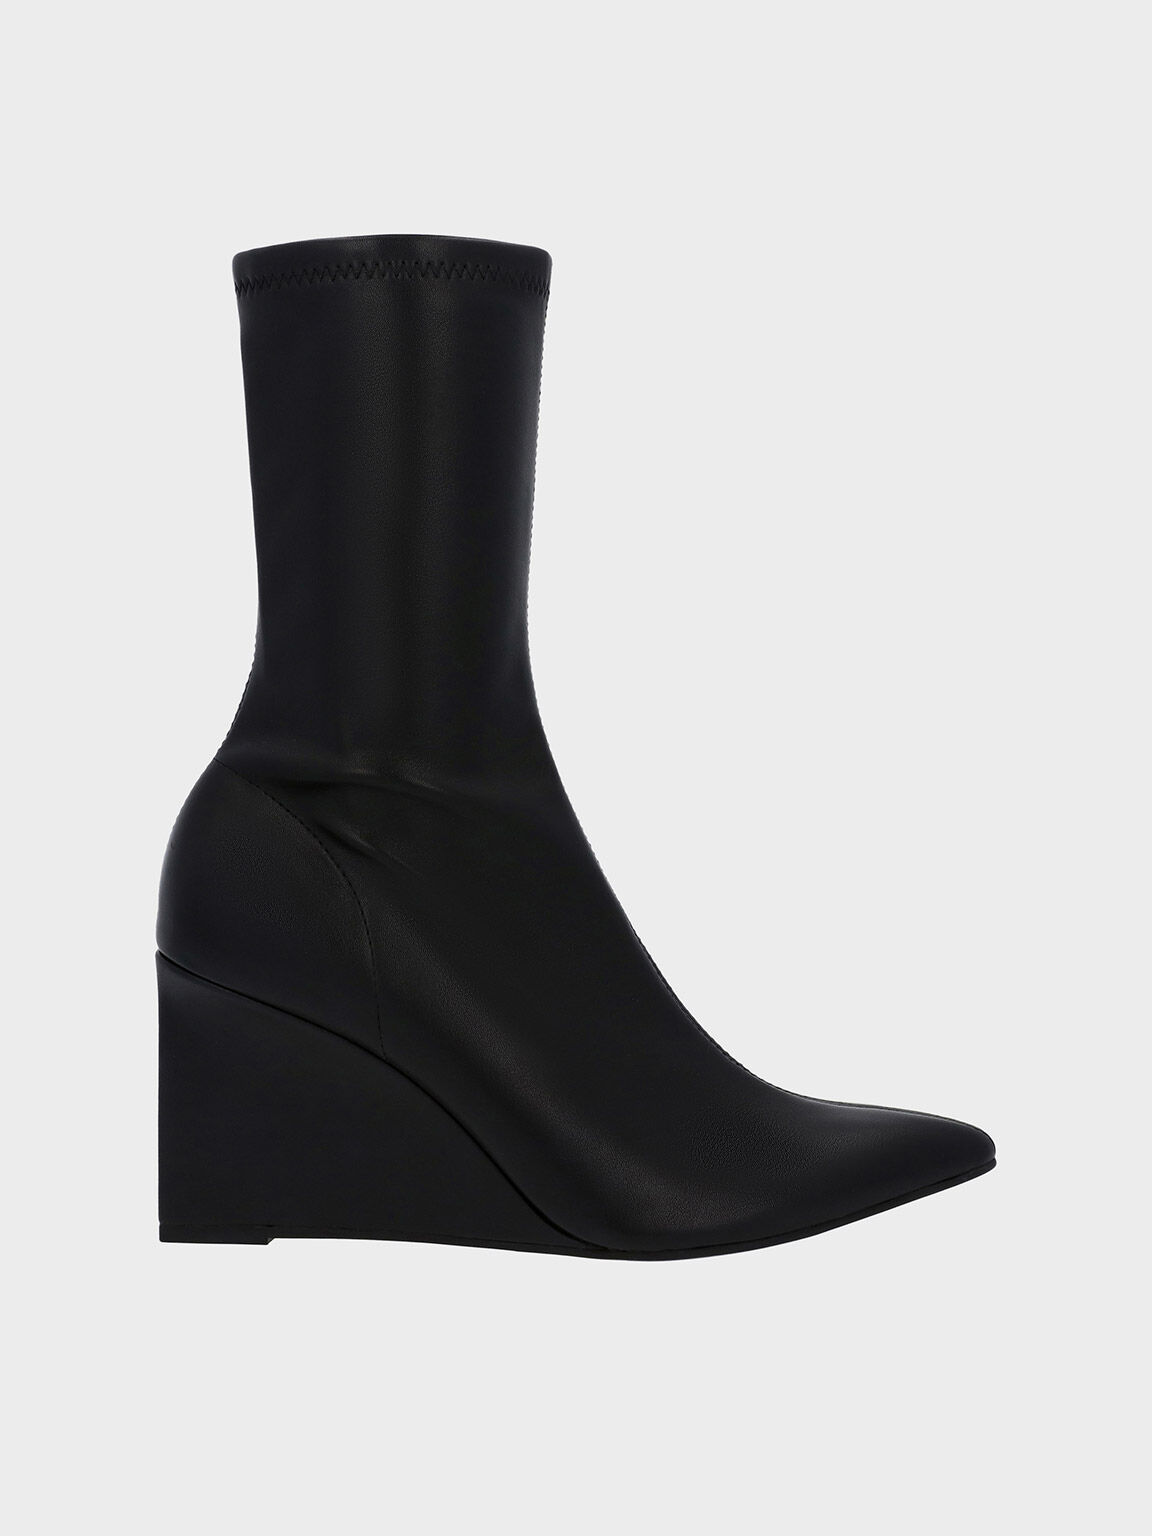 Black Pointed-Toe Wedge Ankle Boots - CHARLES & KEITH NL